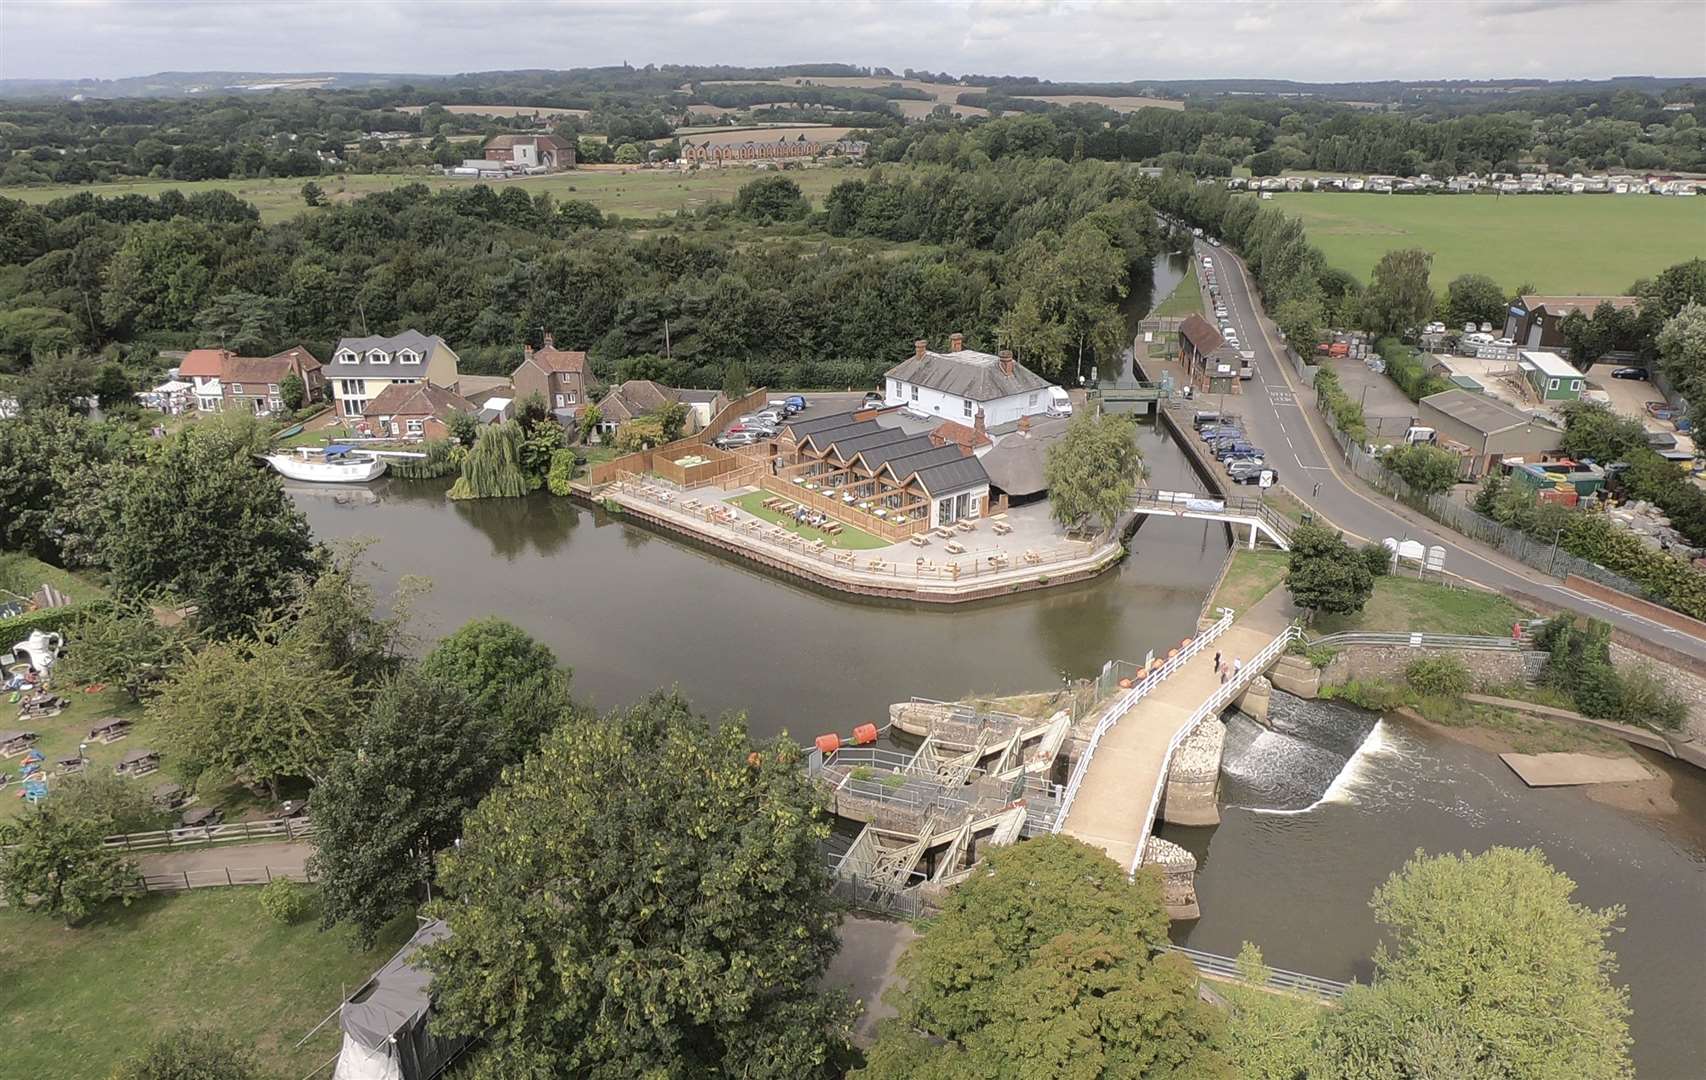 The Boathouse in Yalding as seen from above. Picture: Shepherd Neame